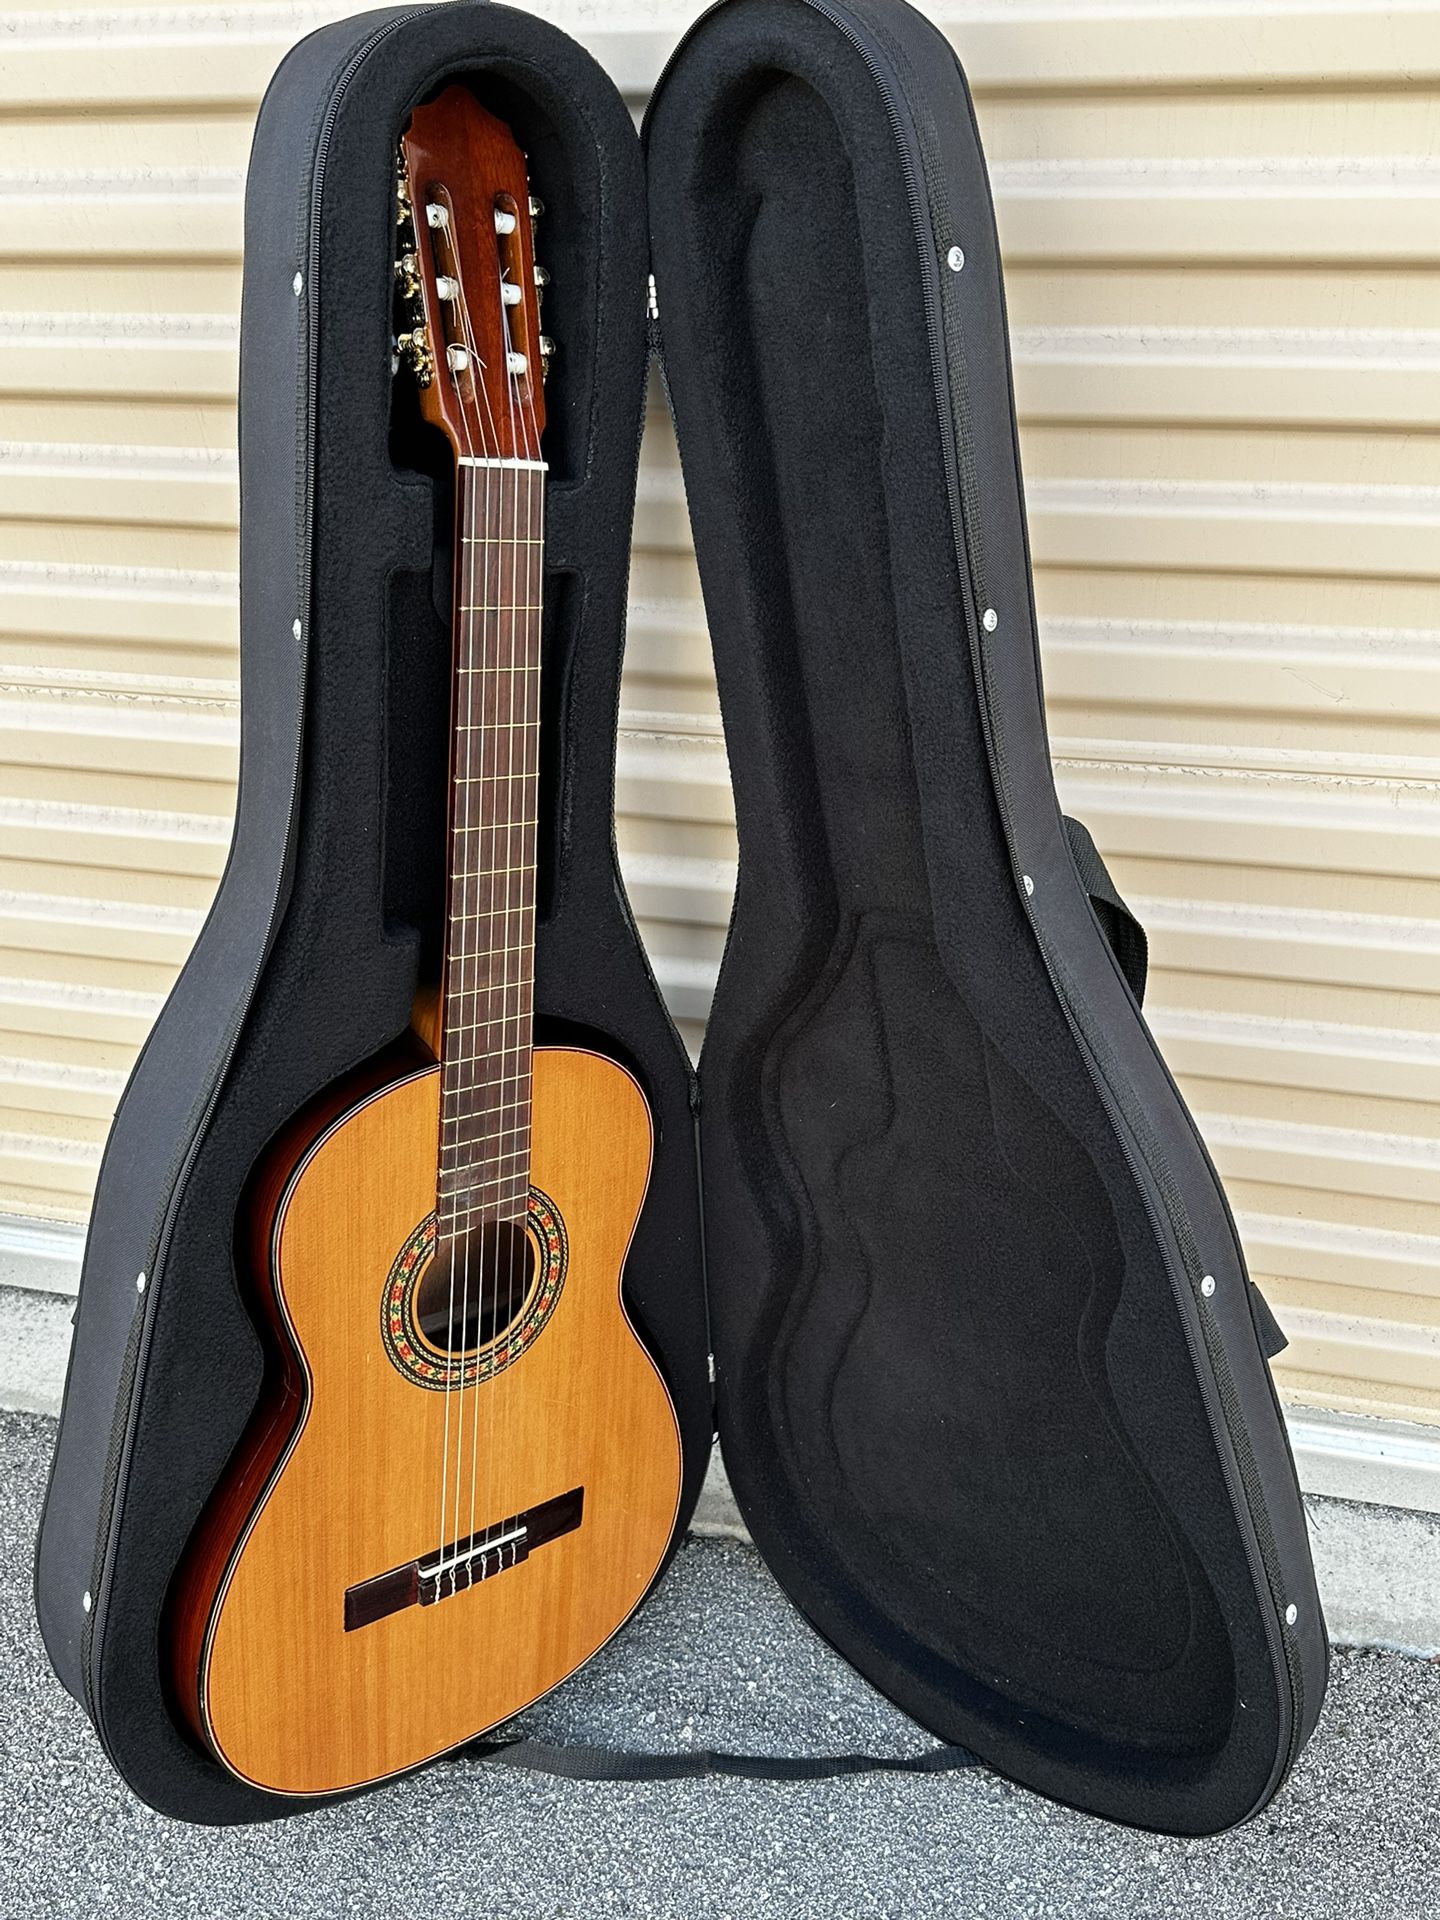 Paracho Acoustic Guitar with Hard Case.   Appraised at Guitar Center $210 w/out Hard Case ($100). Total Savings $155.